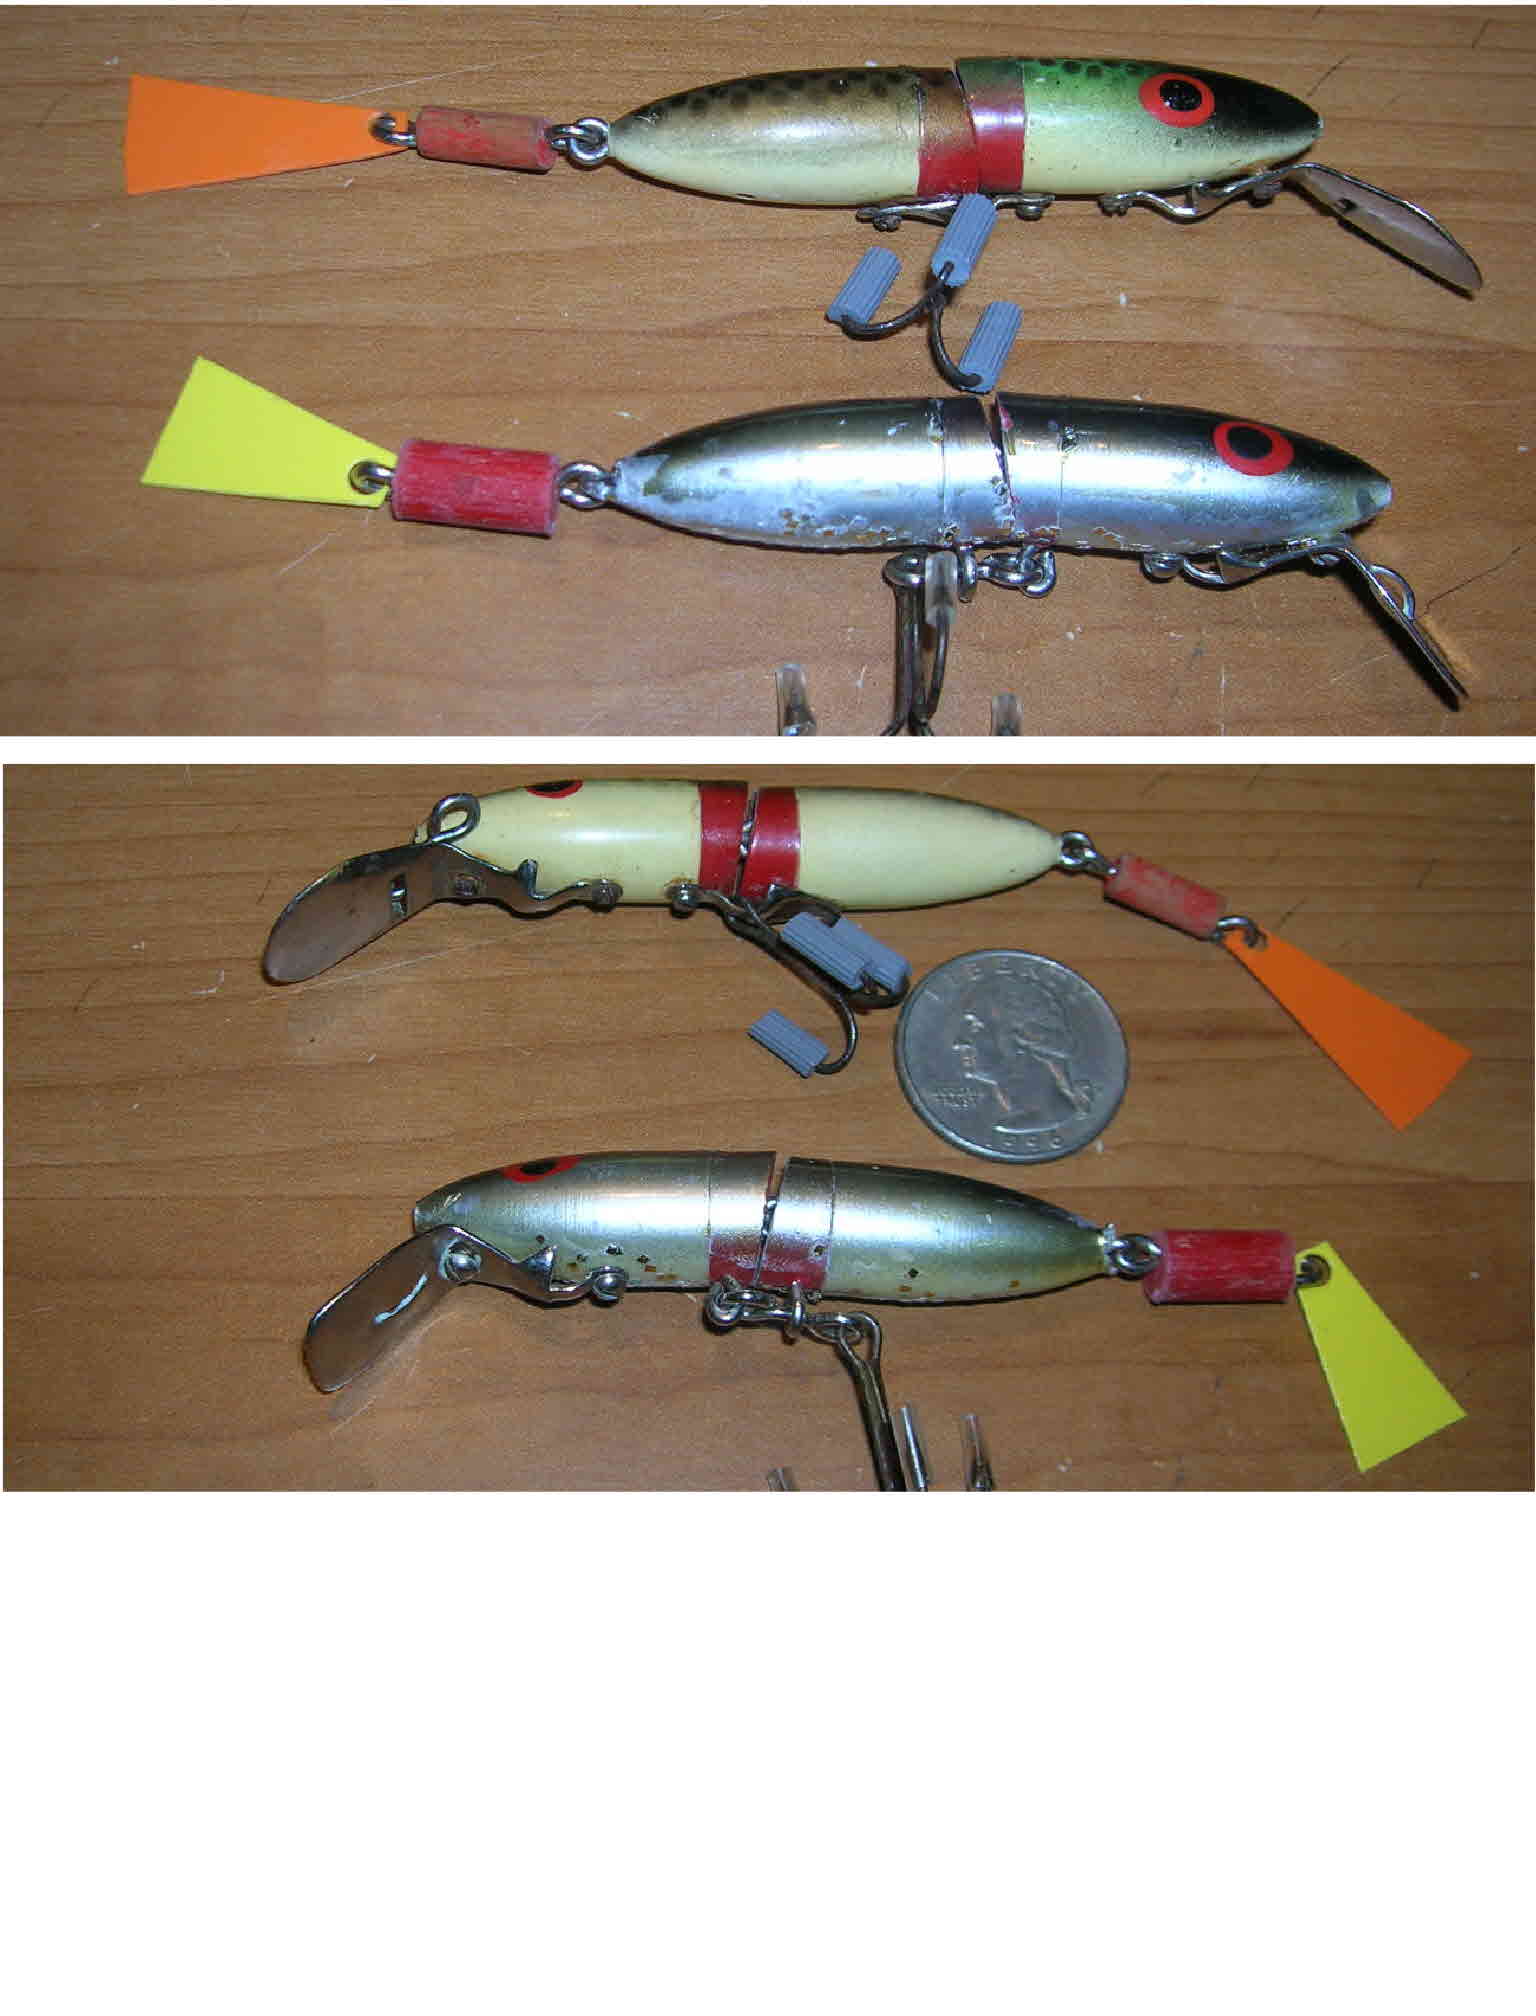 https://fishingcollectables.com/images/lm036.jpg